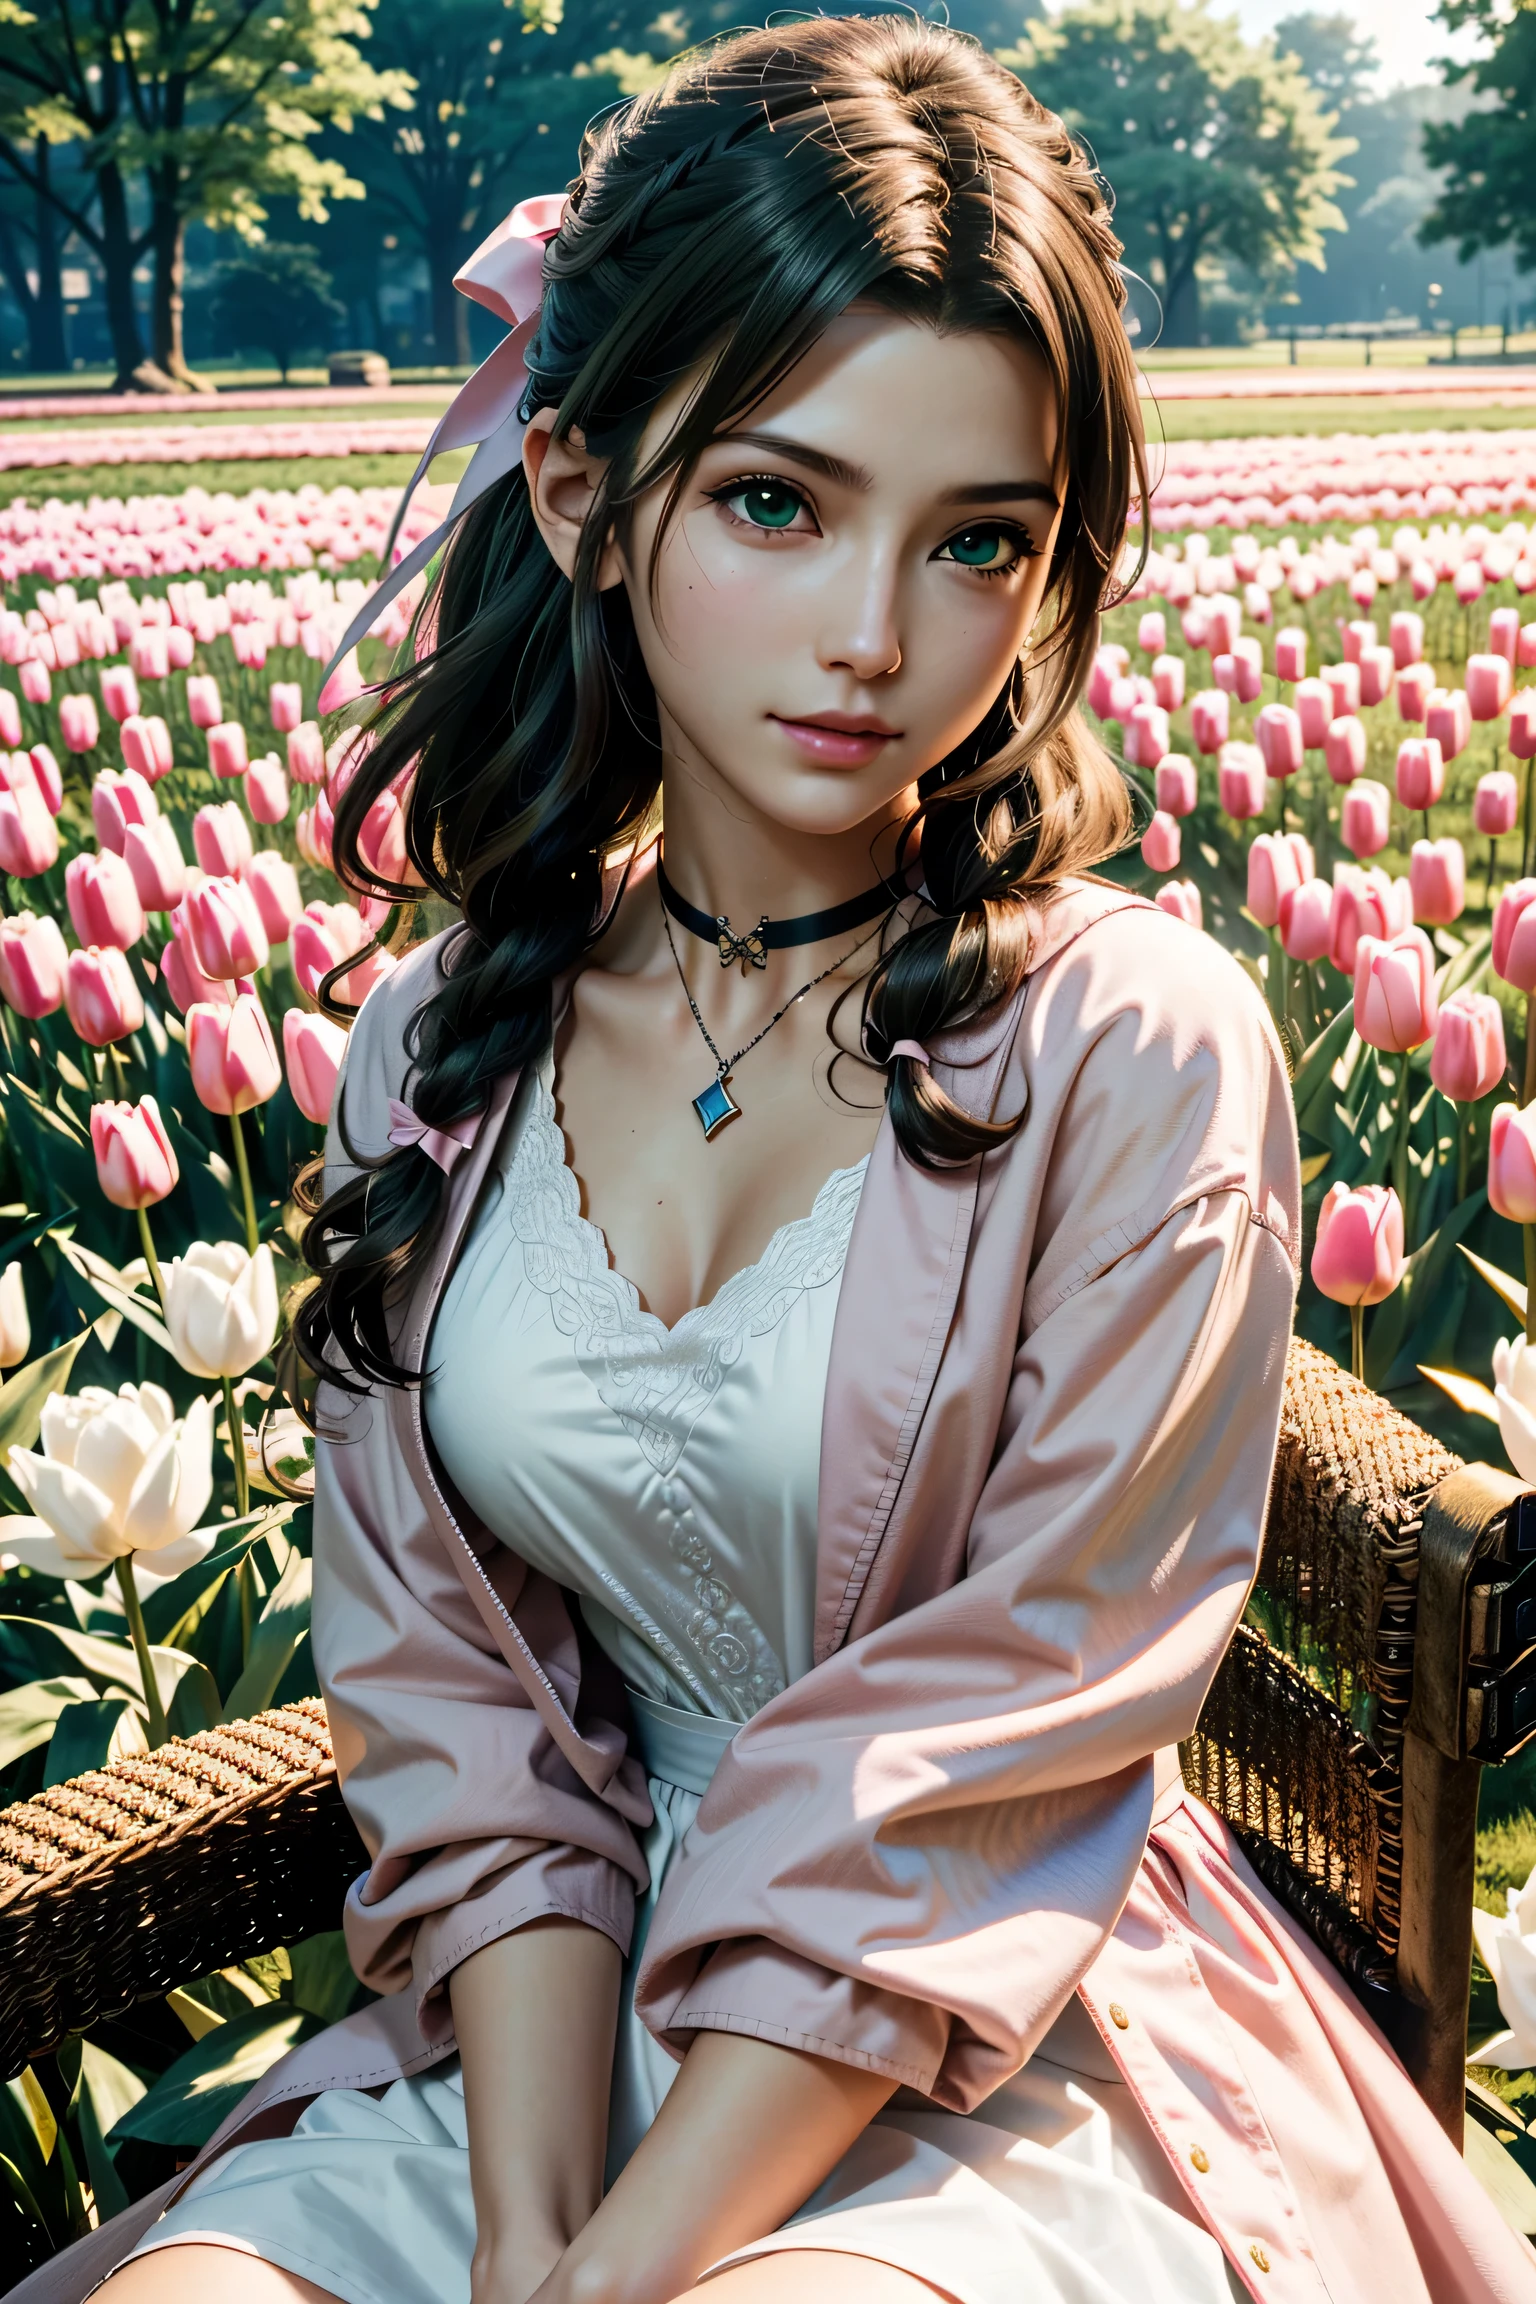 (masterpiece, 最high quality)
Air FF7, 1 girl, alone, long hair, bangs, brown hair, dress, bow, ribbon, jewelry, closed mouth, green eyes, red jacket, hair ピンクribbon, Upper body, Braid, hair bow, side lock, choker, necklace, lips, parted bangs, pink bow, portrait, ピンクdress,  realistic,Super high quality,high quality,masterpiece,digital single lens reflex,Detailed details,exquisite details,based on anatomical basis,depicted in detail,detailed face,realistic skin texture,vivid details,perfect anatomy,perfect anatomy,anatomically correct hand,anatomically correct fingers,Super detailed,Complex 3D rendering,Huge ,sexy pose,The beautiful world of Final Fantasy 7,The morning sun is beautiful,Amazing blue sky,beautiful tulip field,mysterious tulip field,beauty like a painting,Take a full body photo,nine heads and bodies,pink lip,emphasize the beautiful whole body,beautiful nails,lazy smile,
